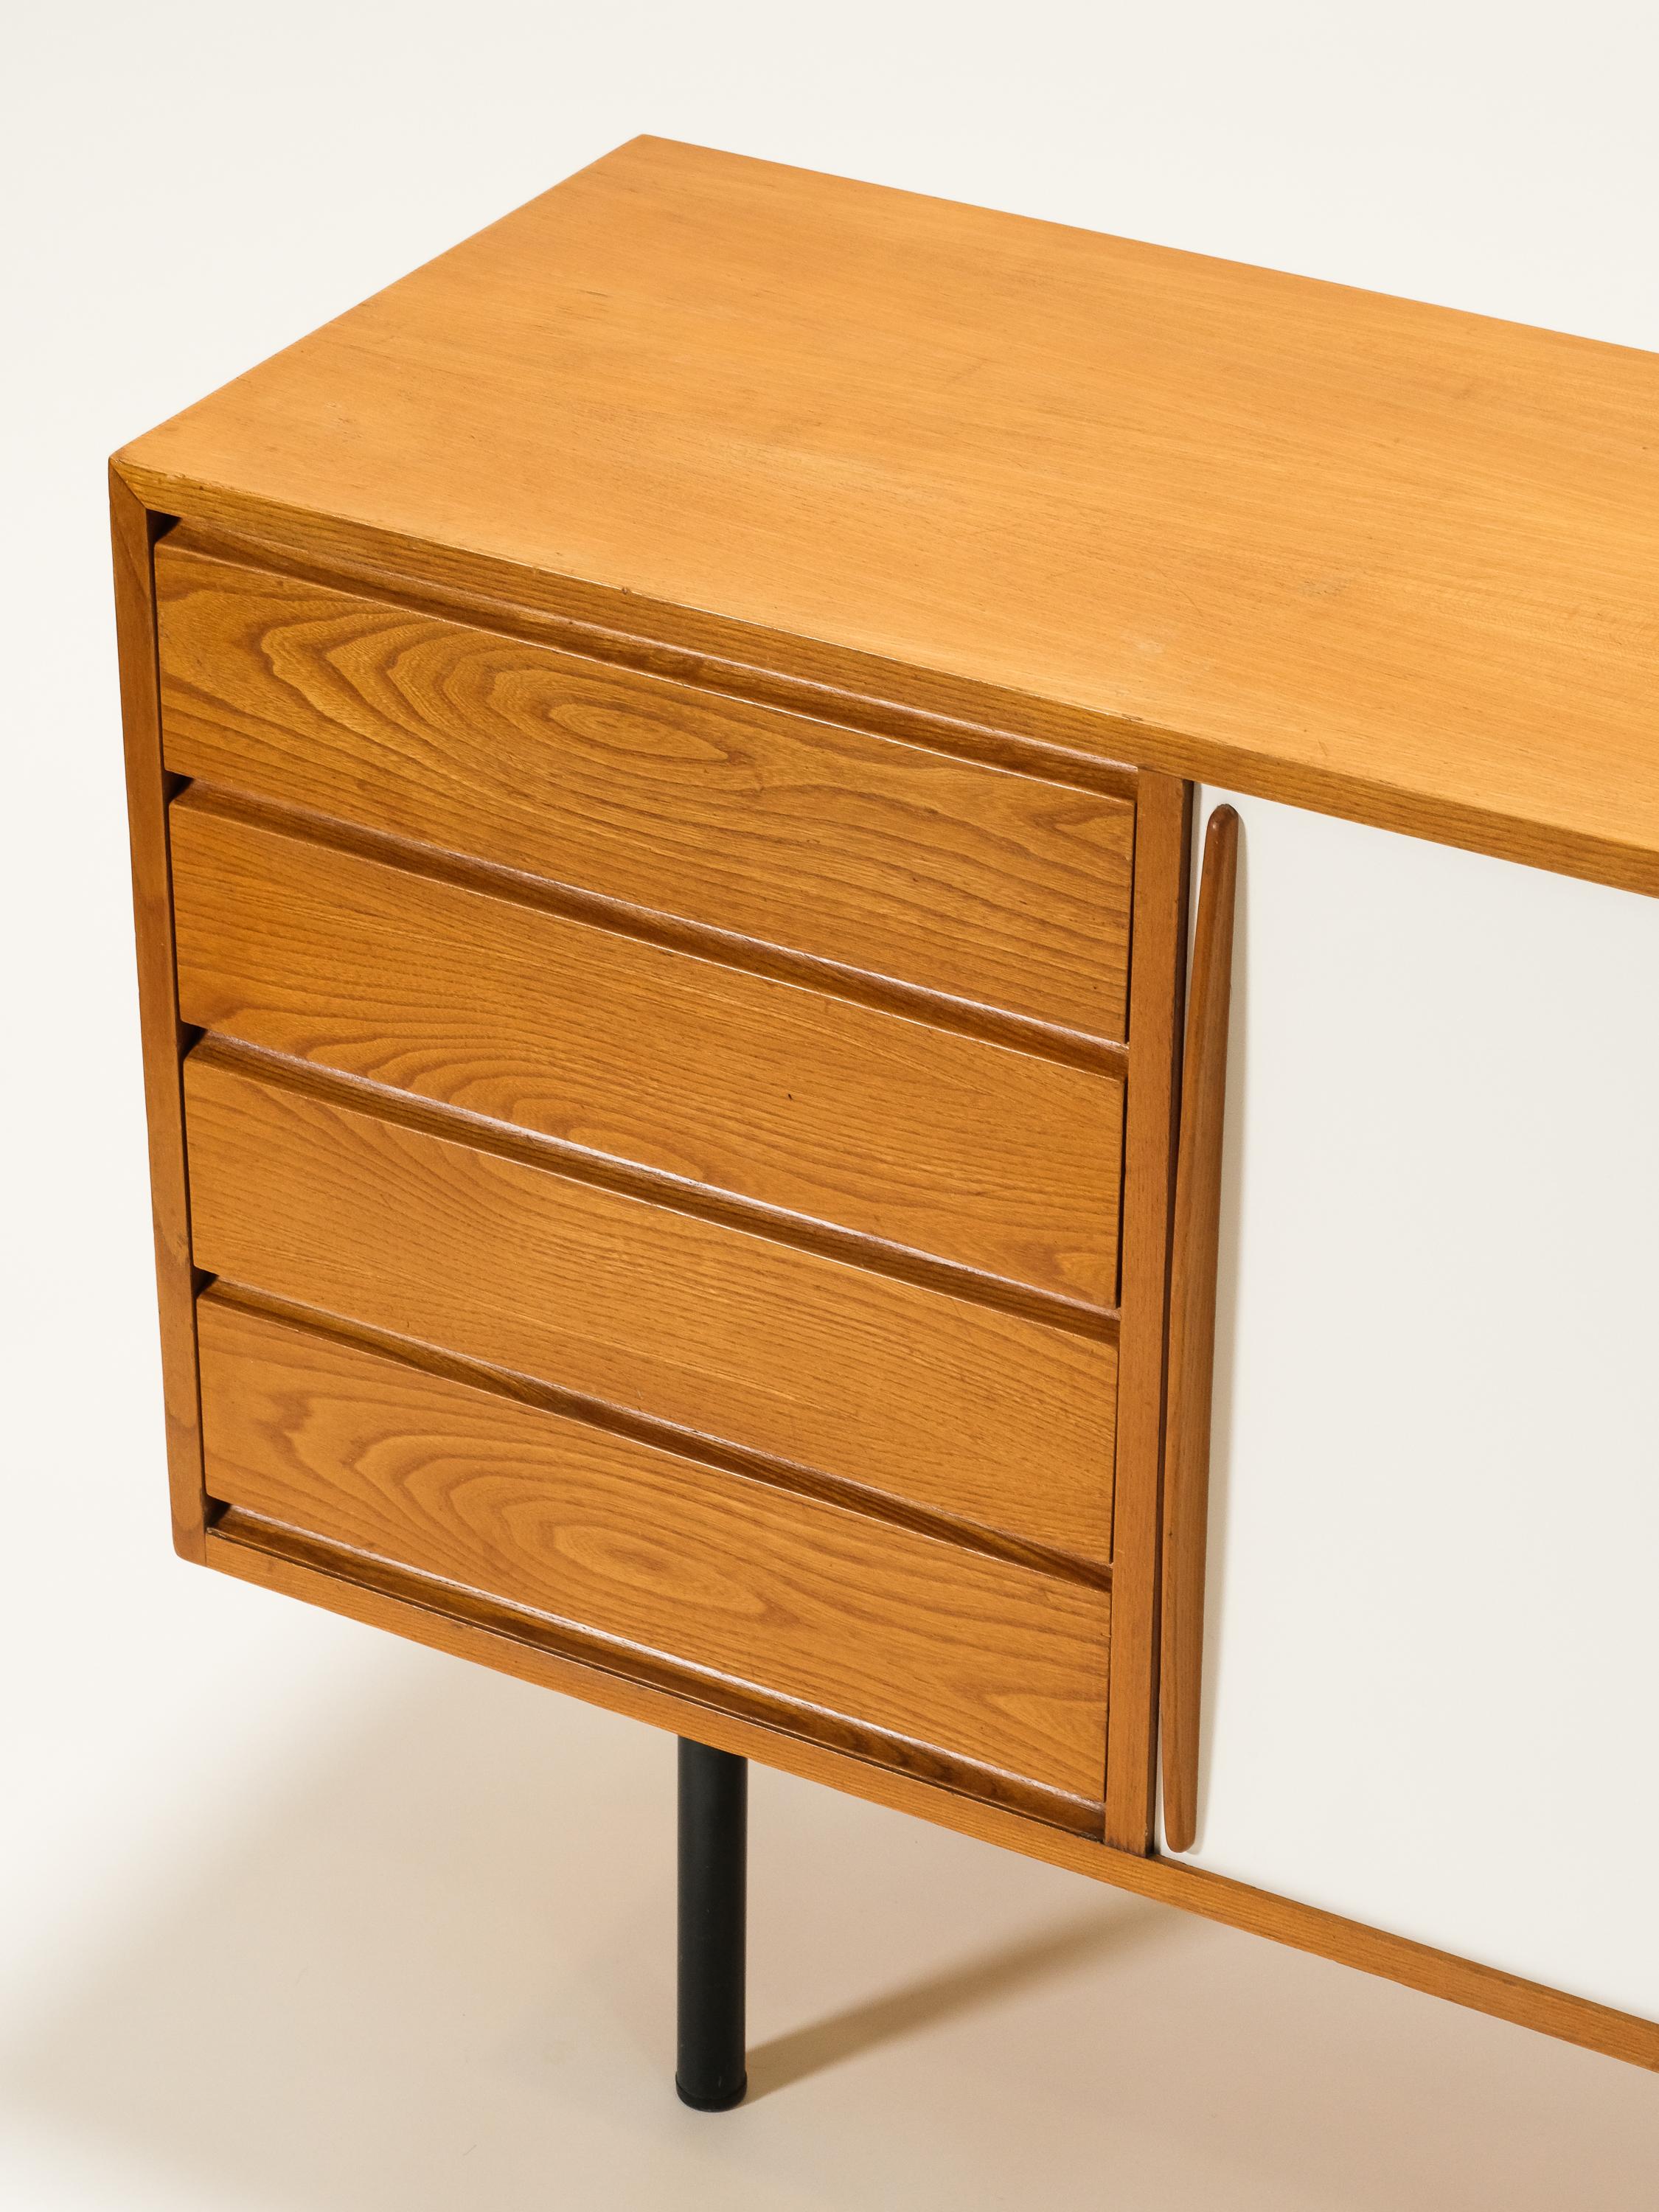 Mid-20th Century Mid-Century Elm Sideboard Model 4004 by Olli Borg for Asko, Finland, 1955